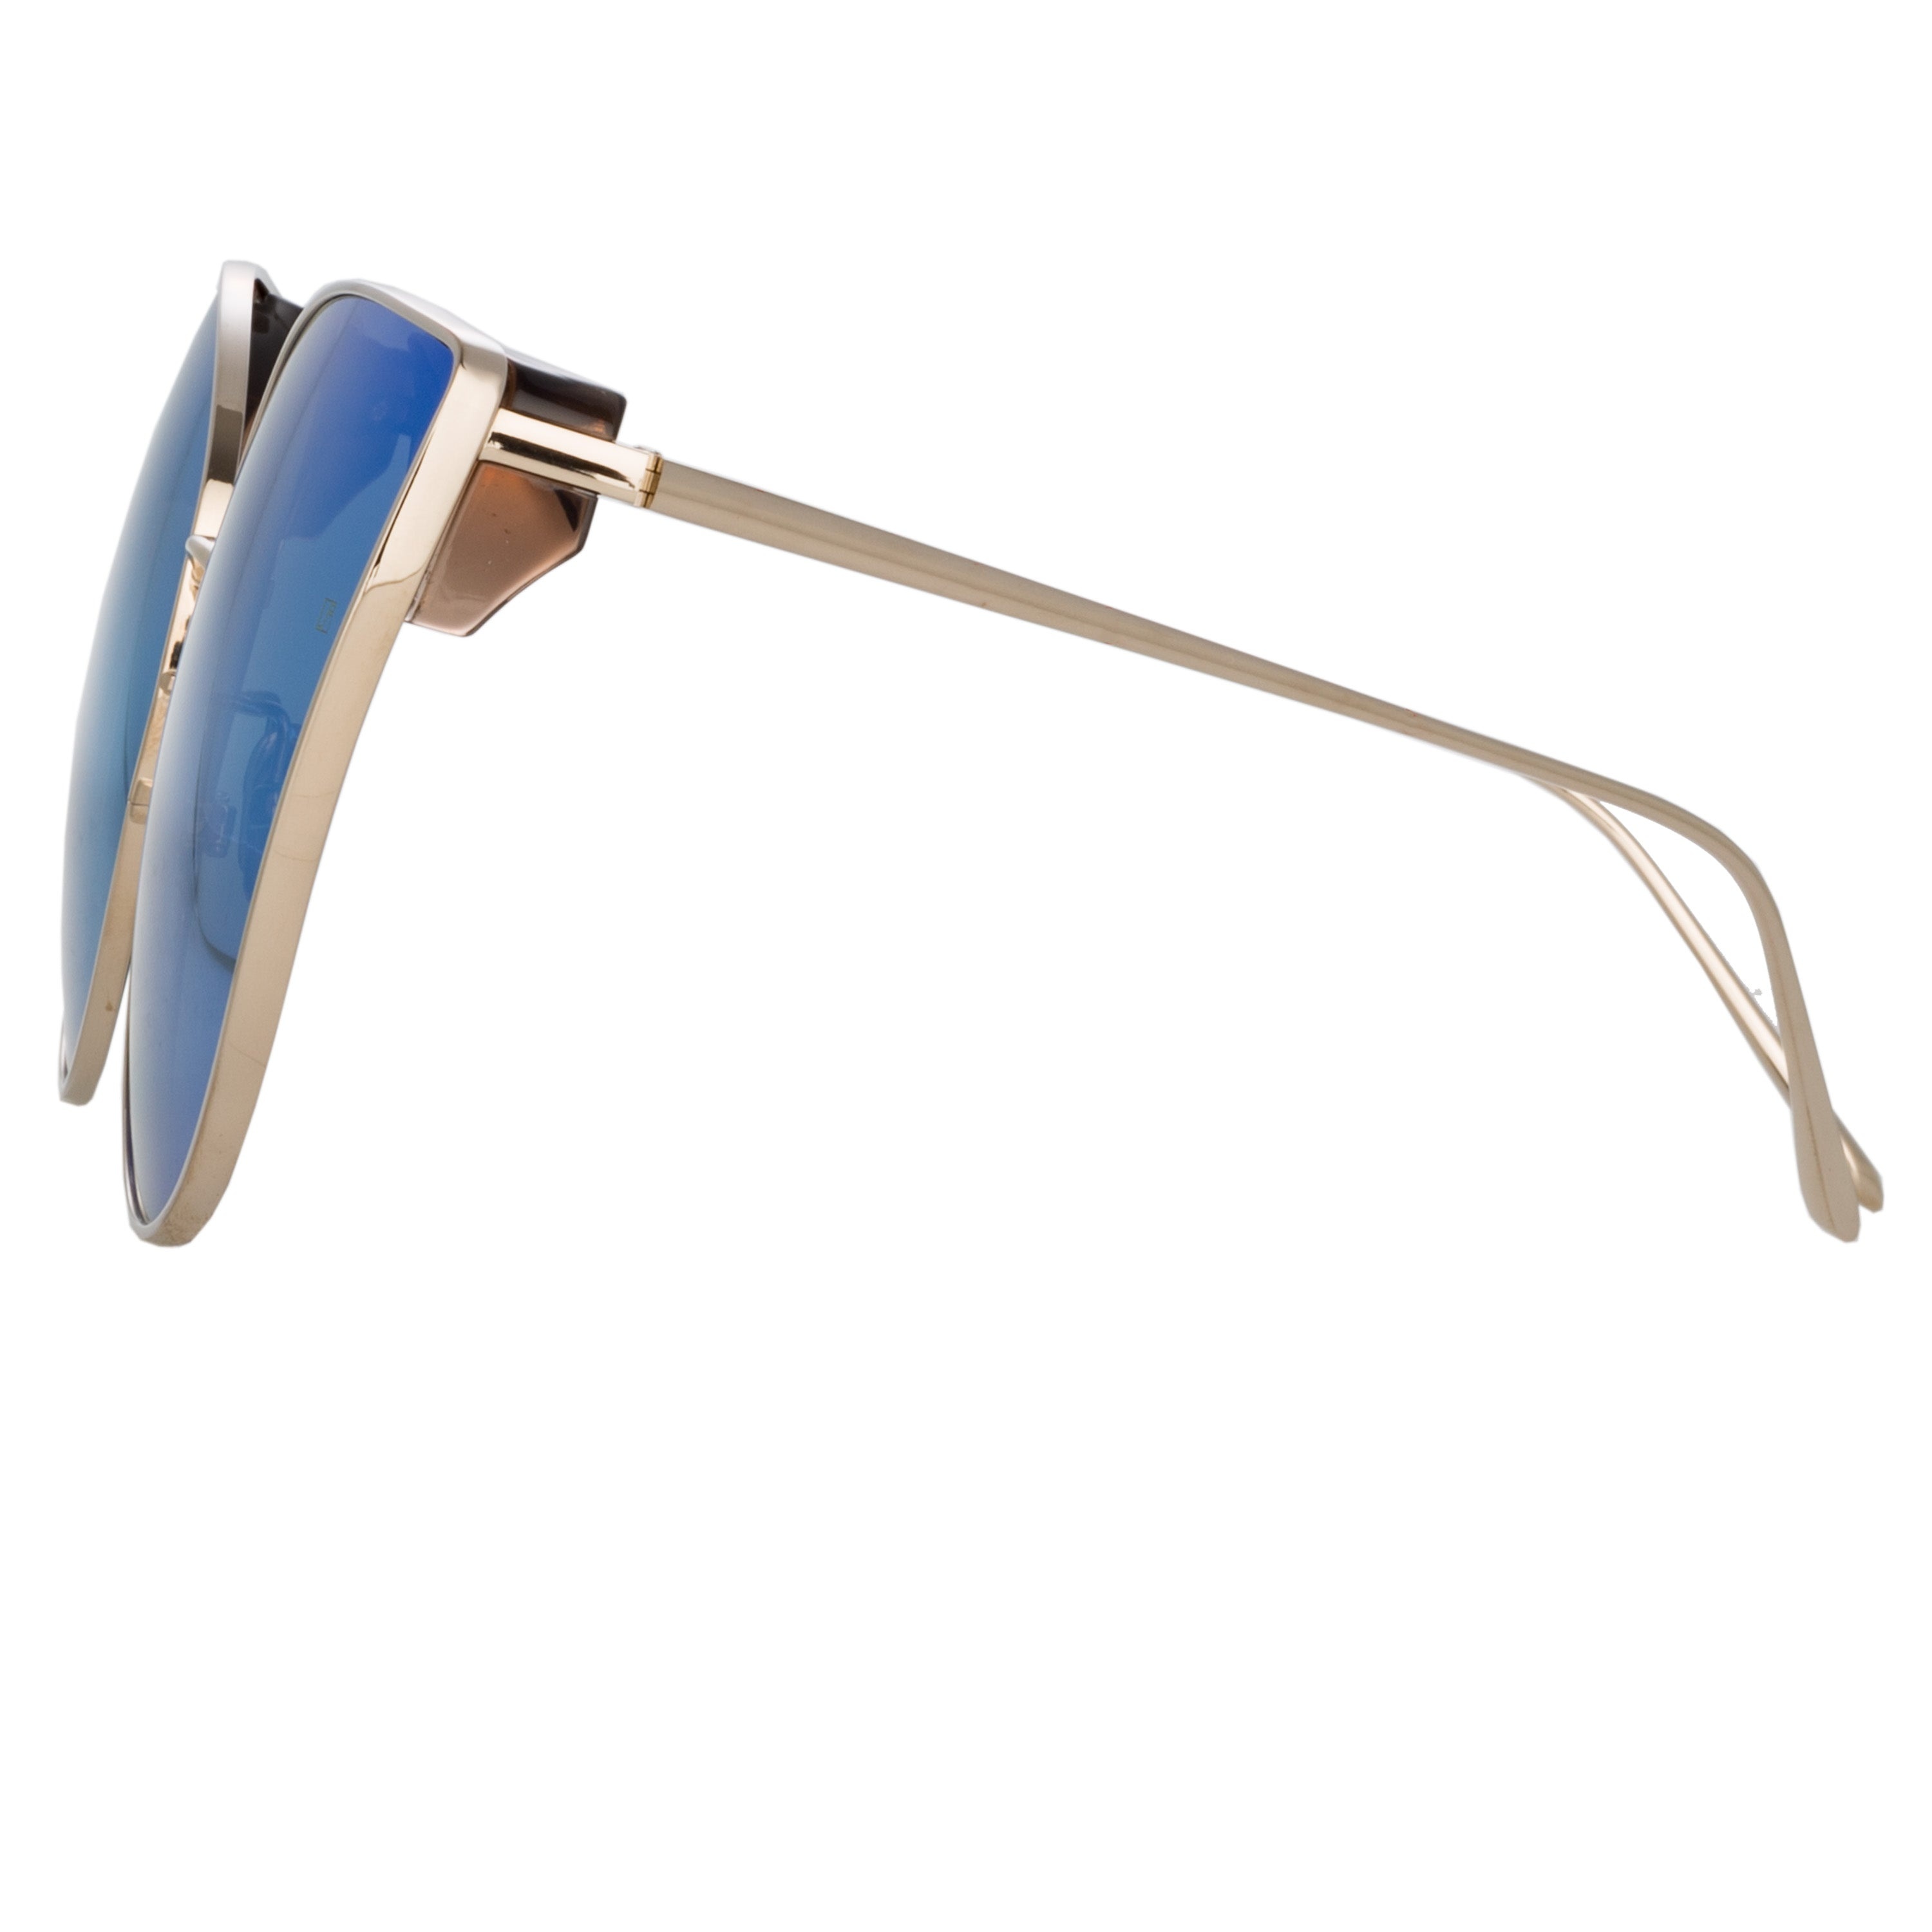 FLYER CAT EYE SUNGLASSES IN LIGHT GOLD AND BLUE - 3